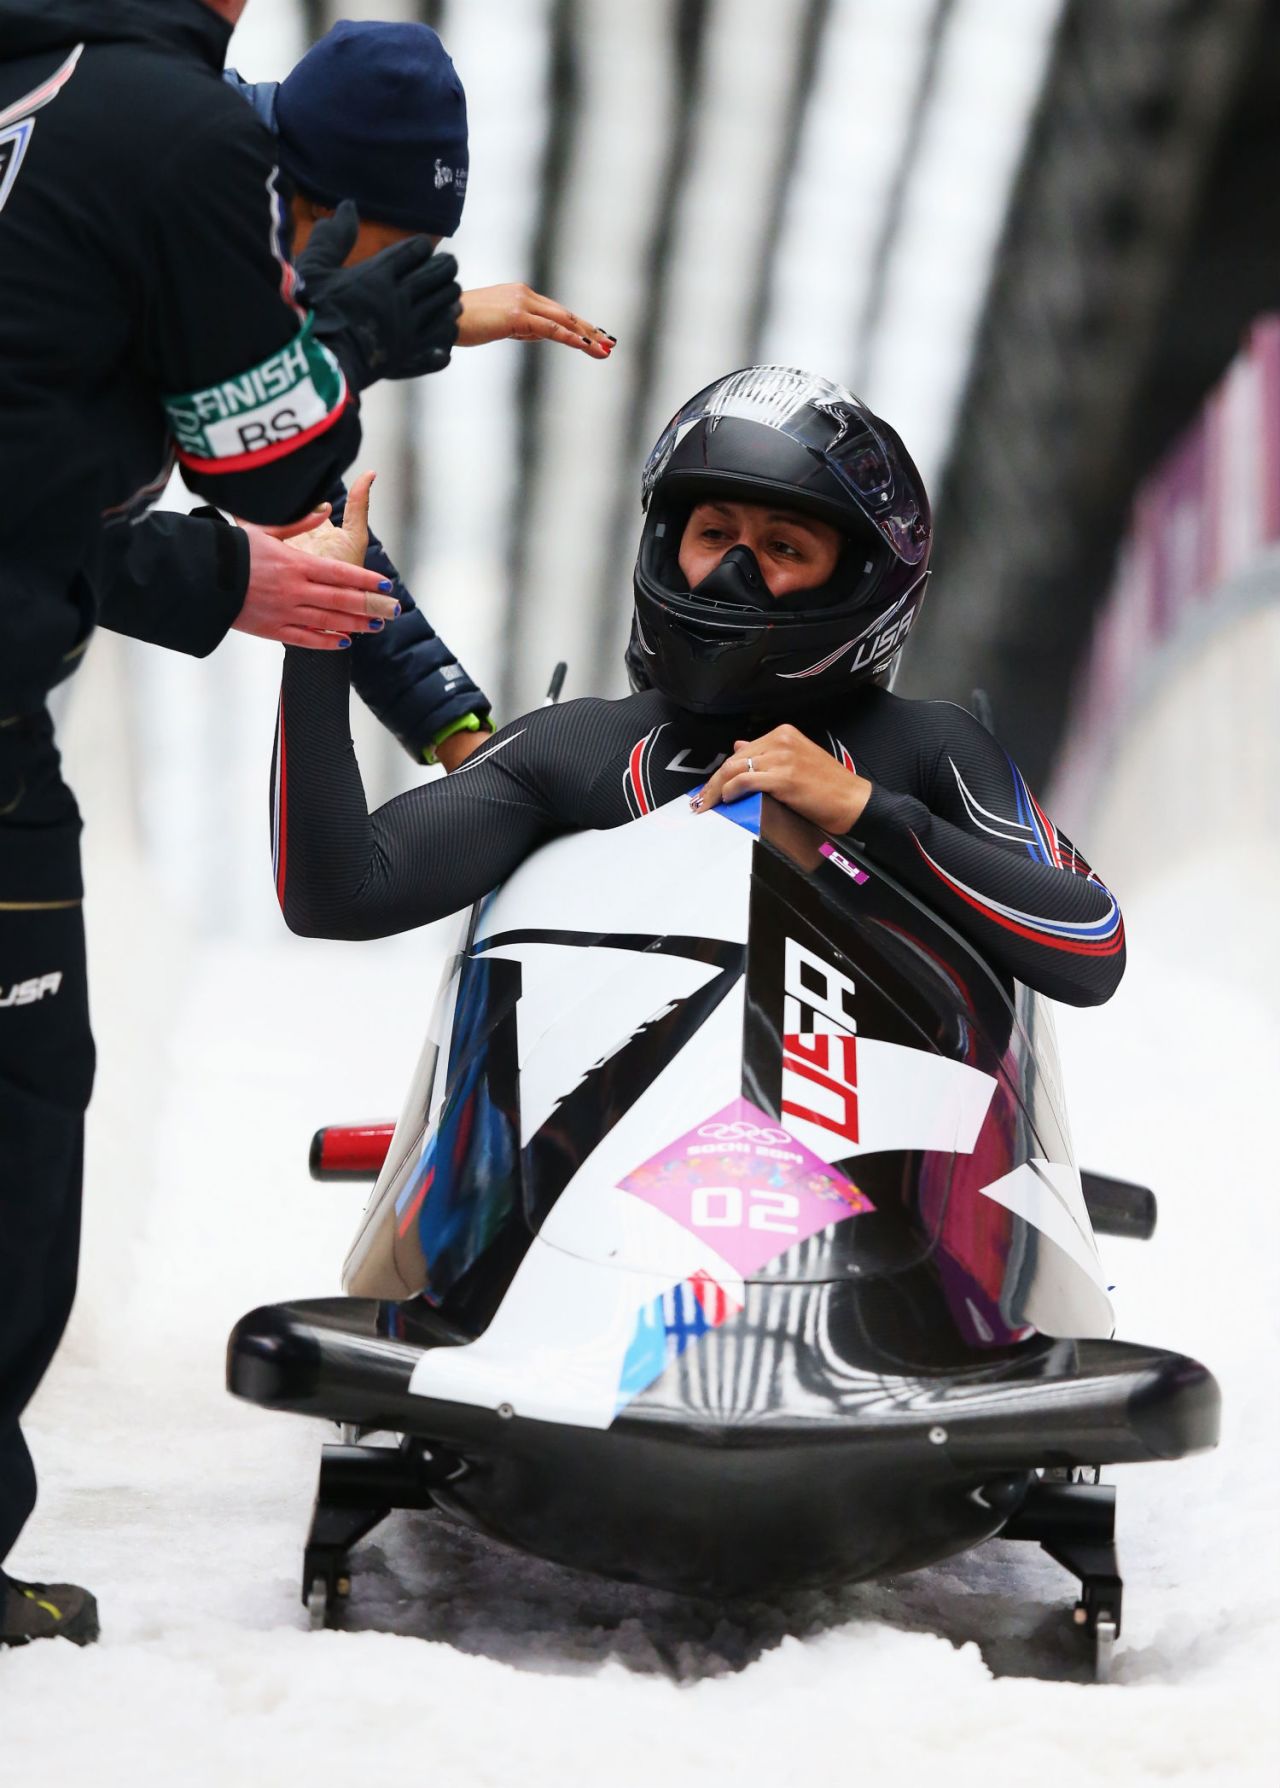 Elana Meyers Taylor -- now coached in part by her husband, in Arizona -- has become one of the "fastest and strongest" pilots in the world of women's bobsled.